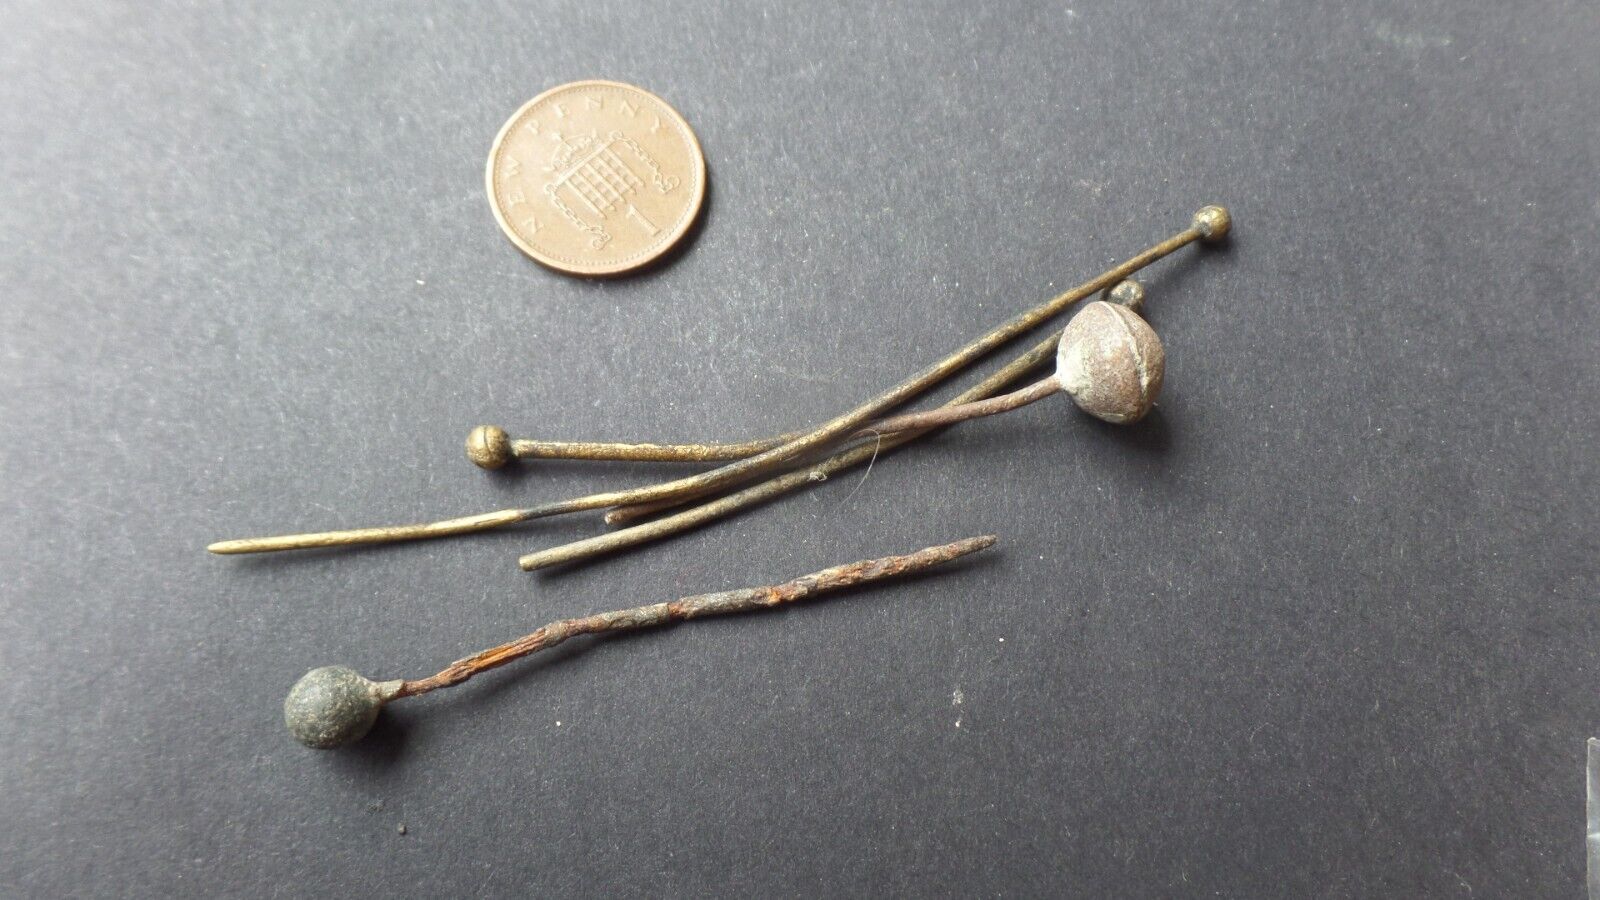 OLD pins 15th century -river thames- Metal Detecting Finds